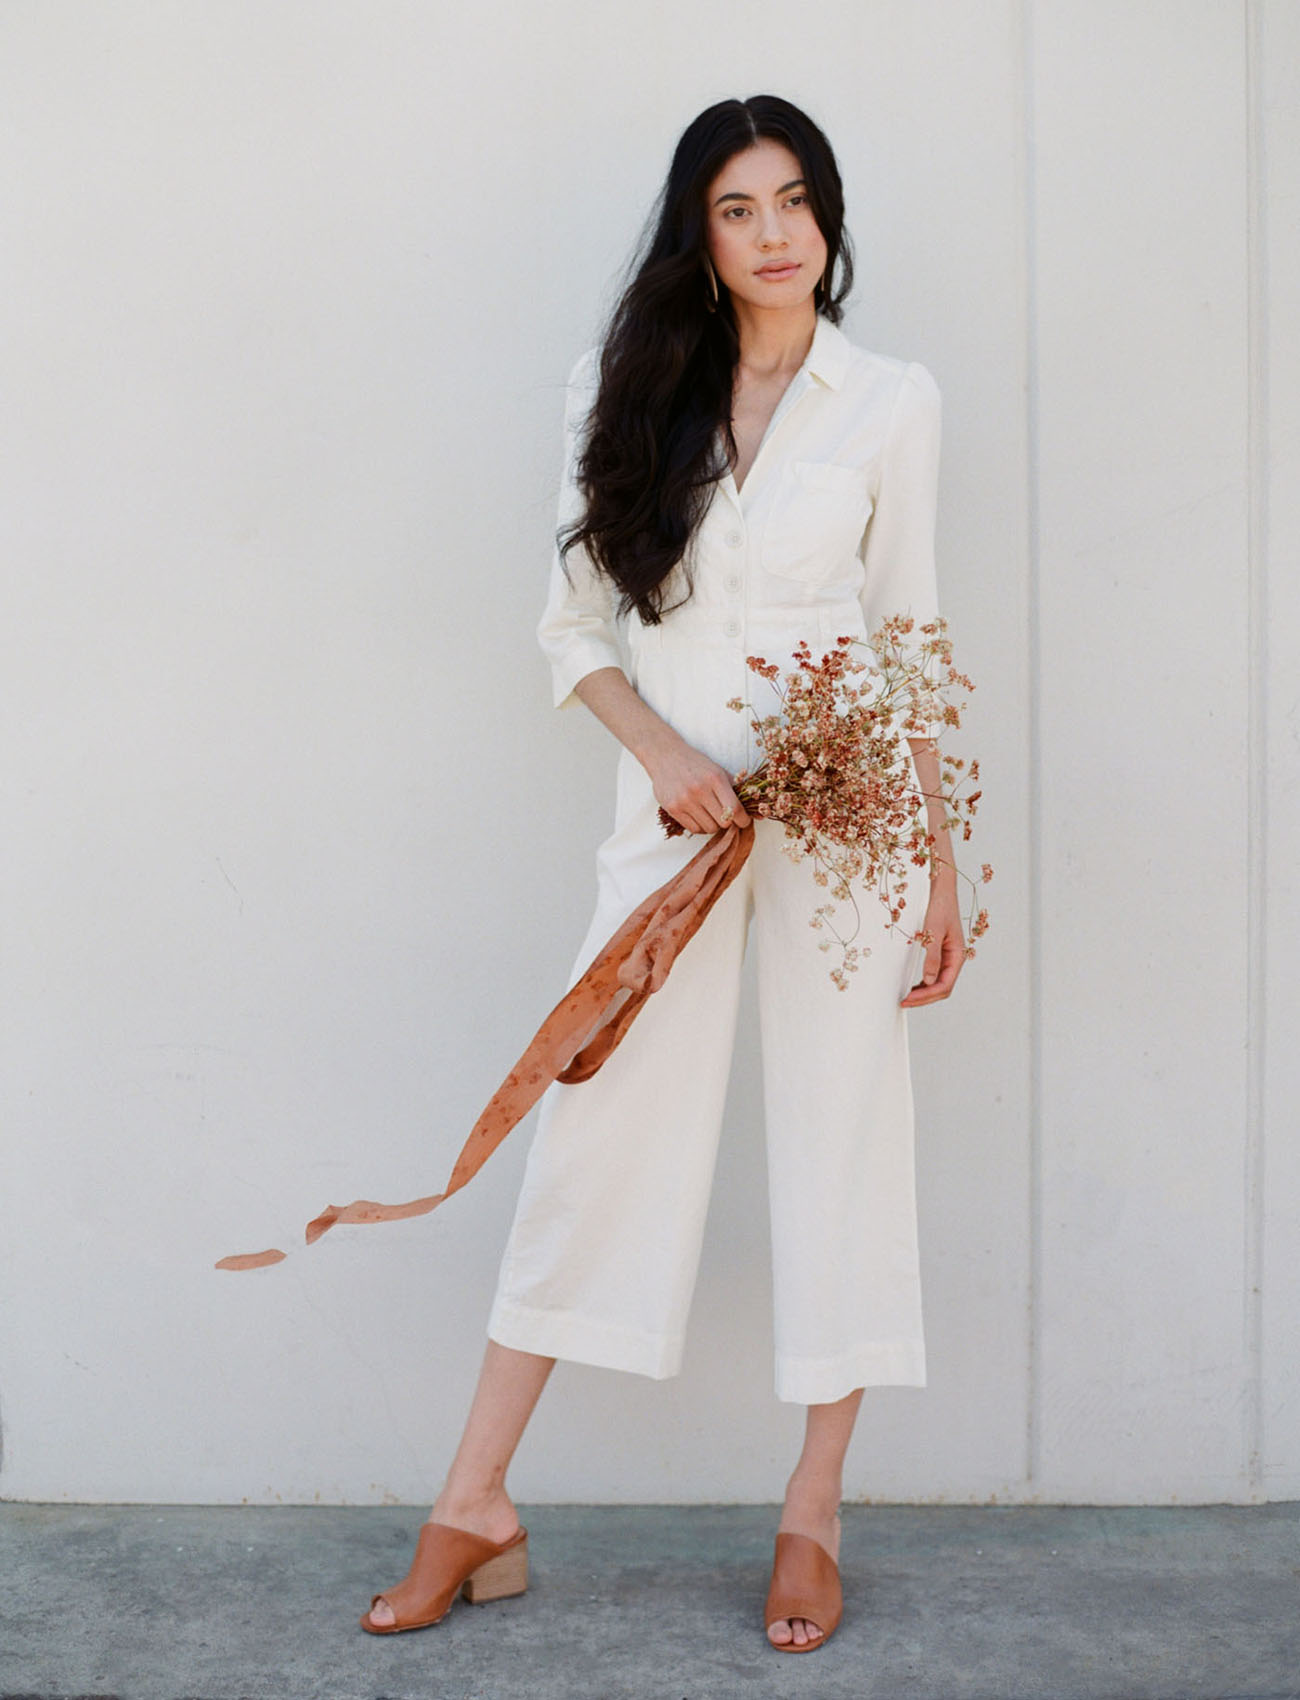 Bride in white pantsuit with rust colored single flower bouquet